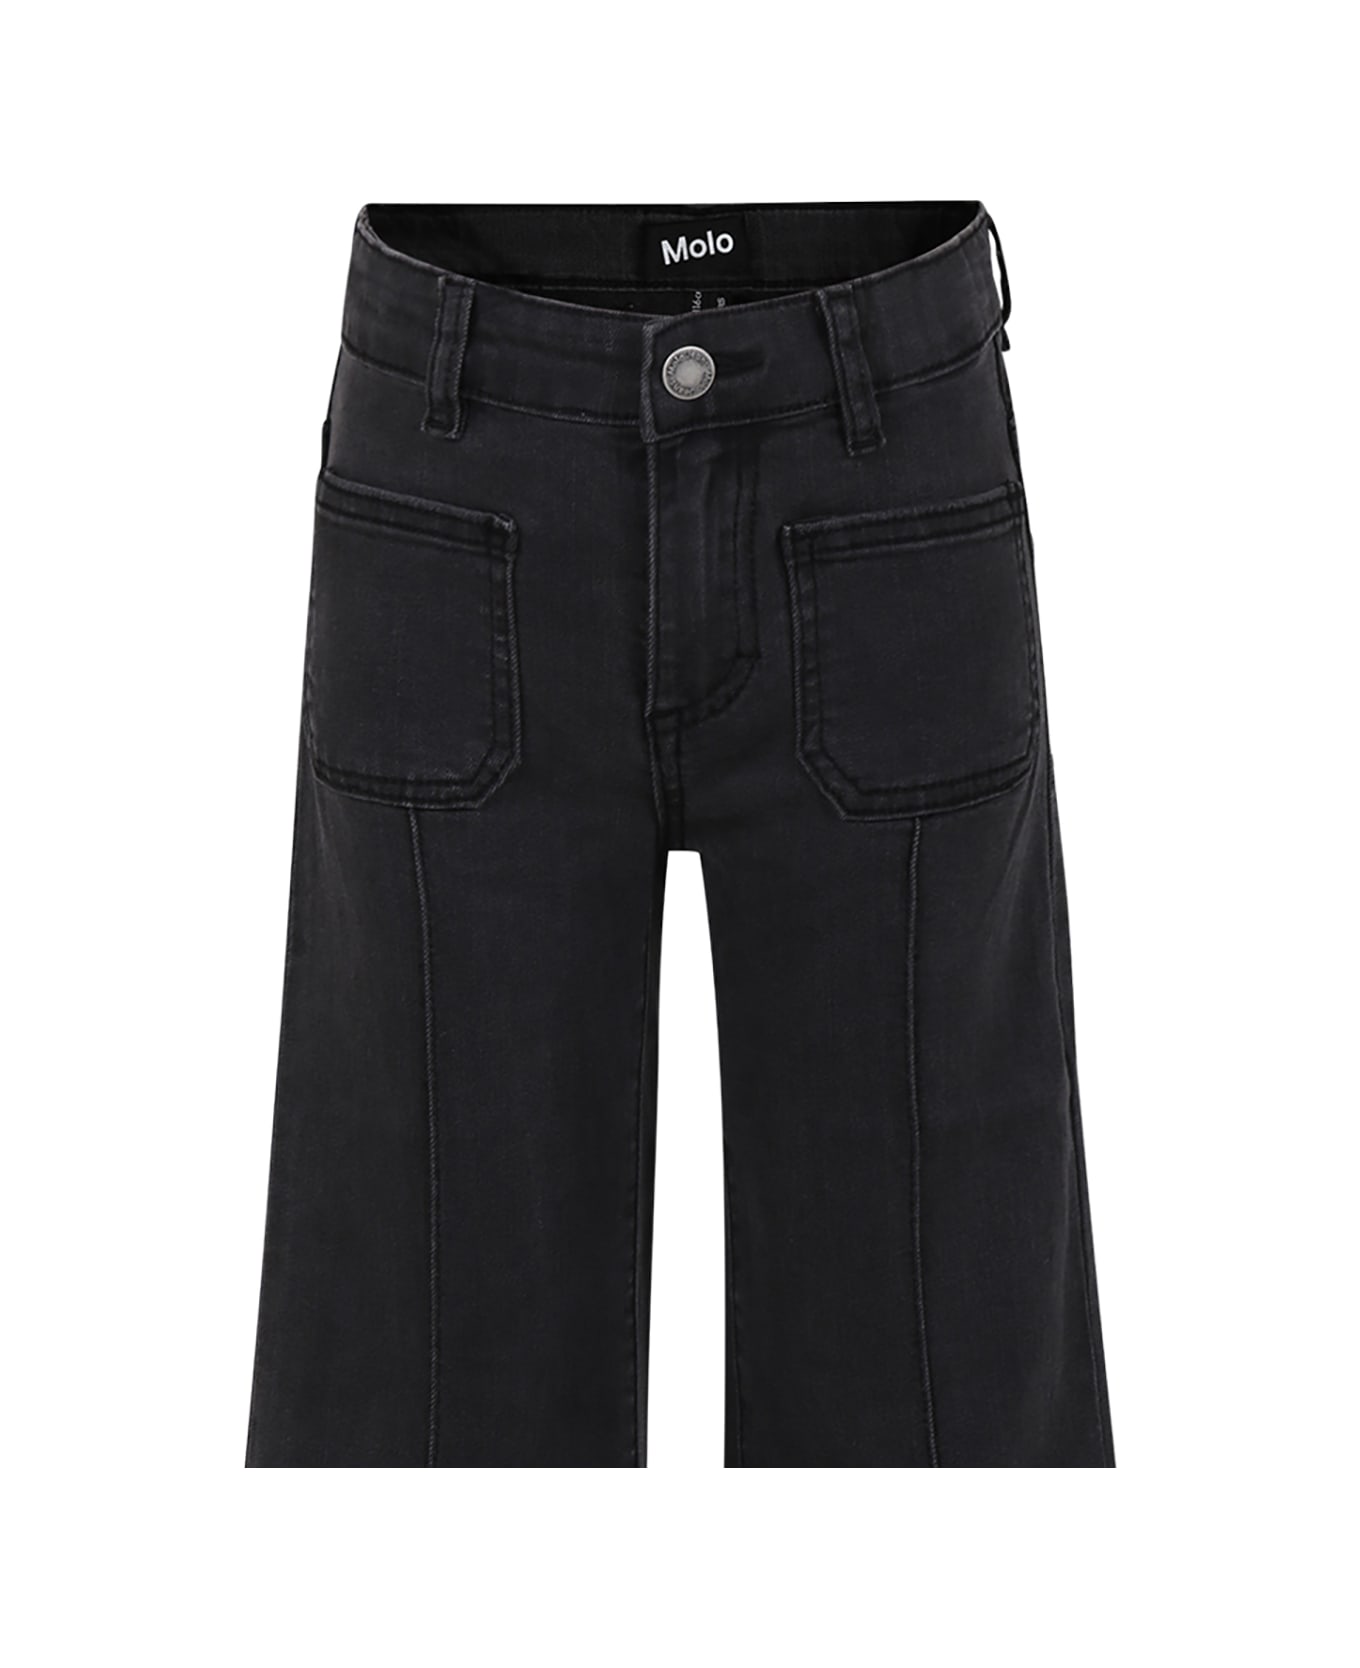 Molo Black Jeans For Girl With Logo - Black ボトムス